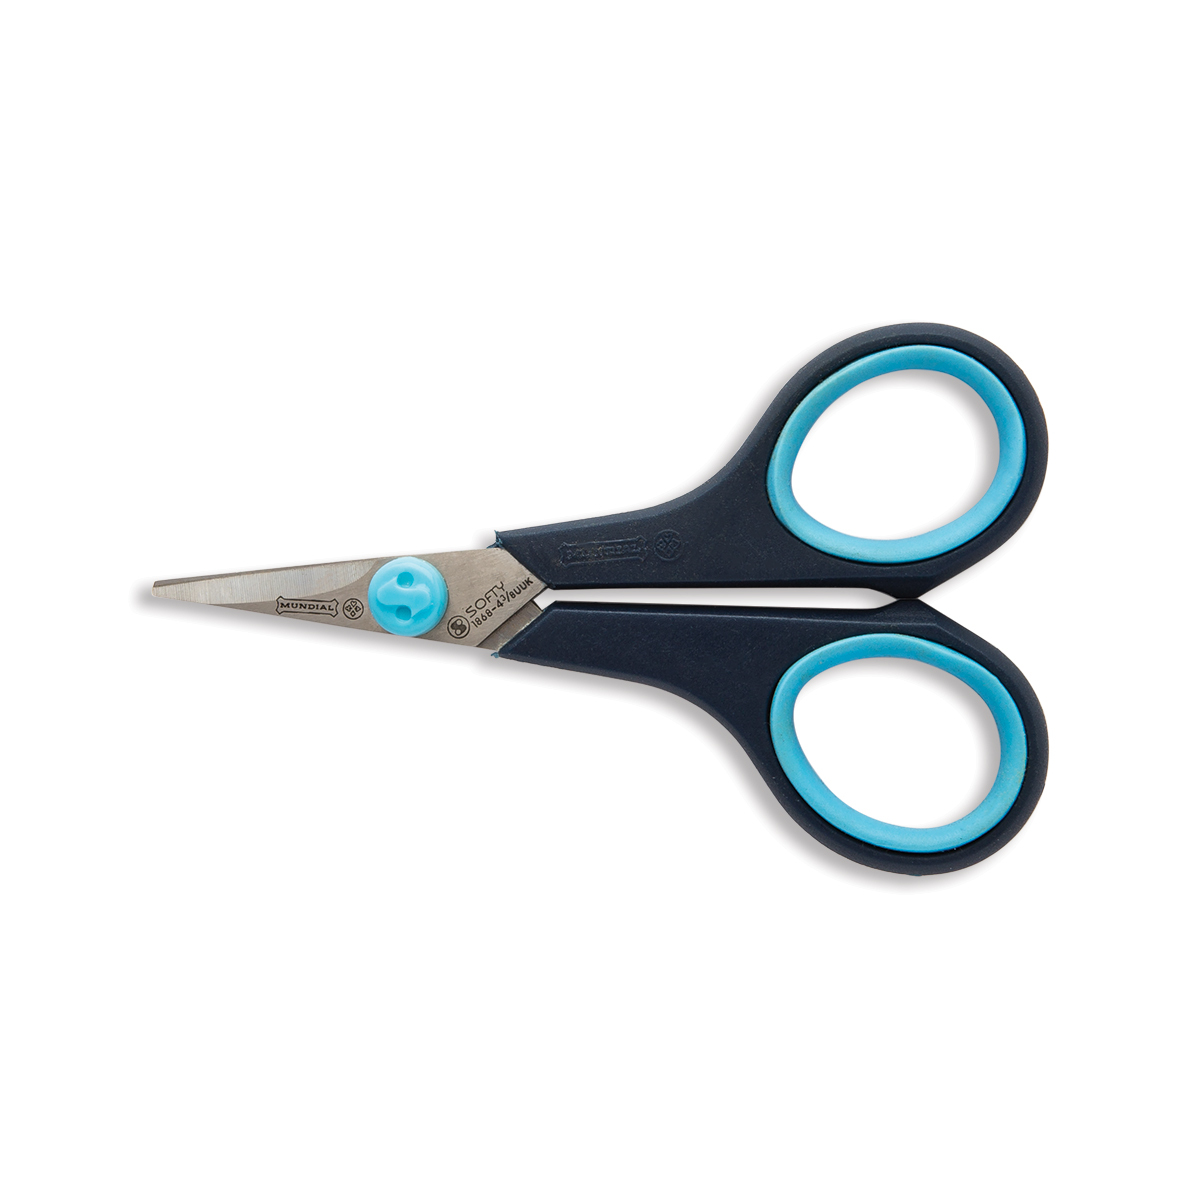 Mundial Classic Forged Curved Embroidery Scissor 4- - 049774018798